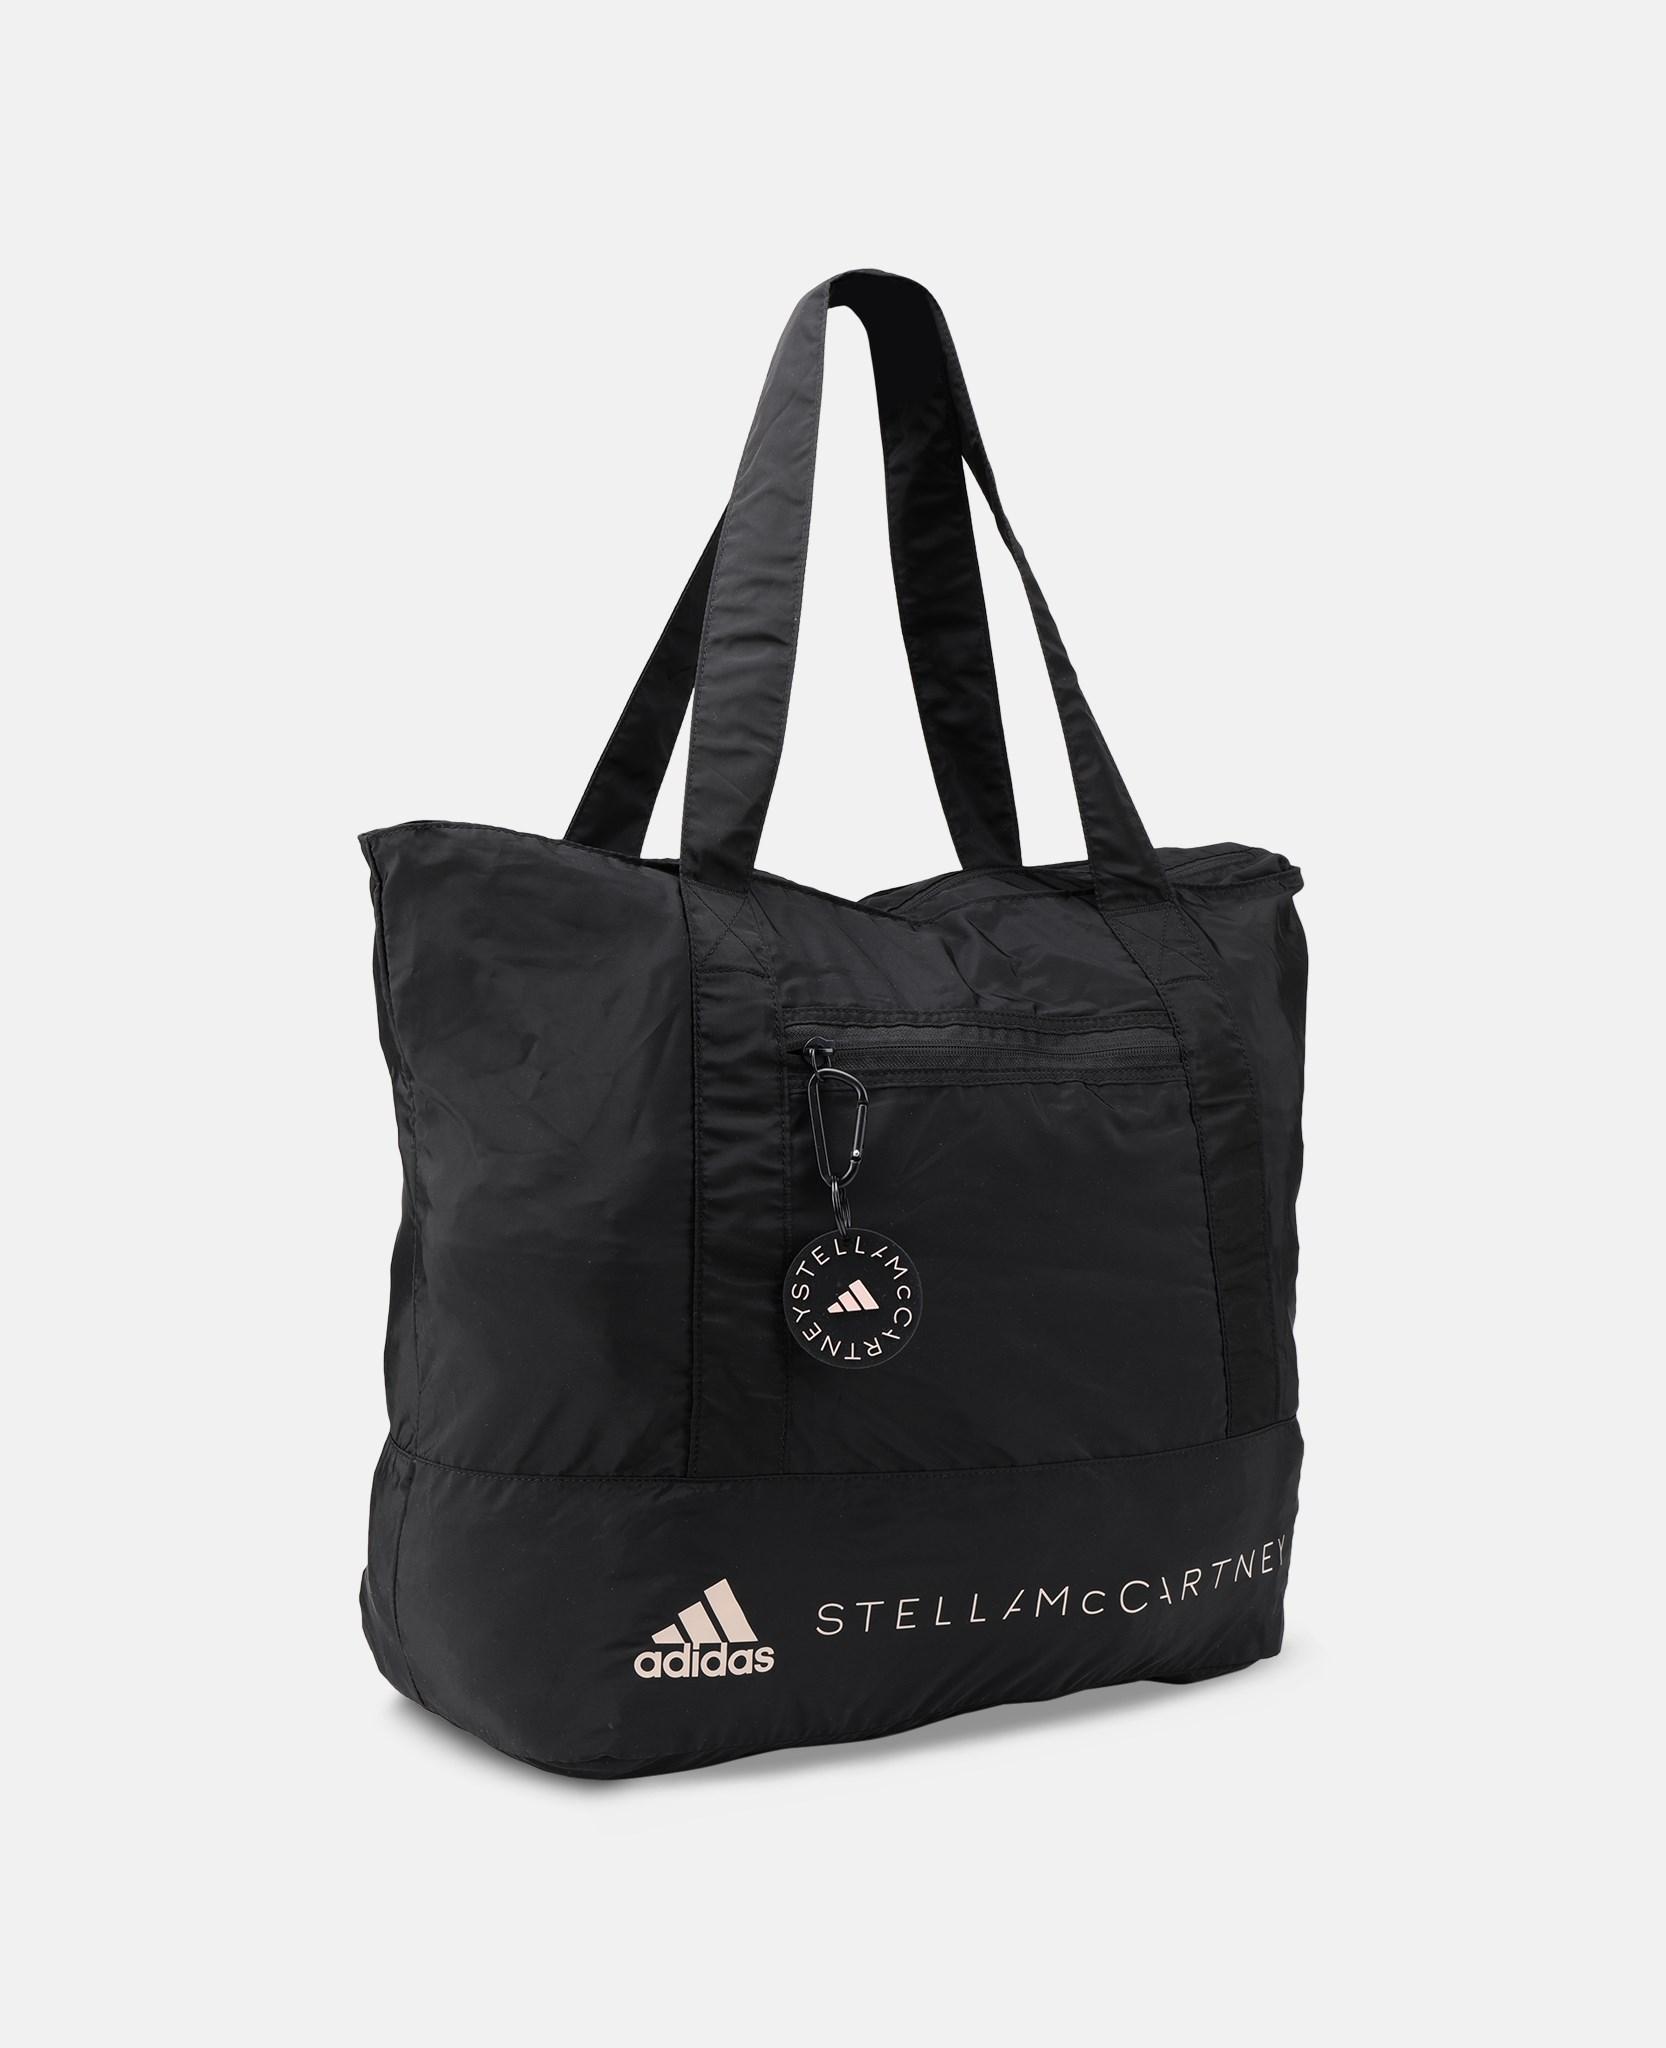 adidas By Stella McCartney Synthetic Black Printed Tote Bag - Lyst